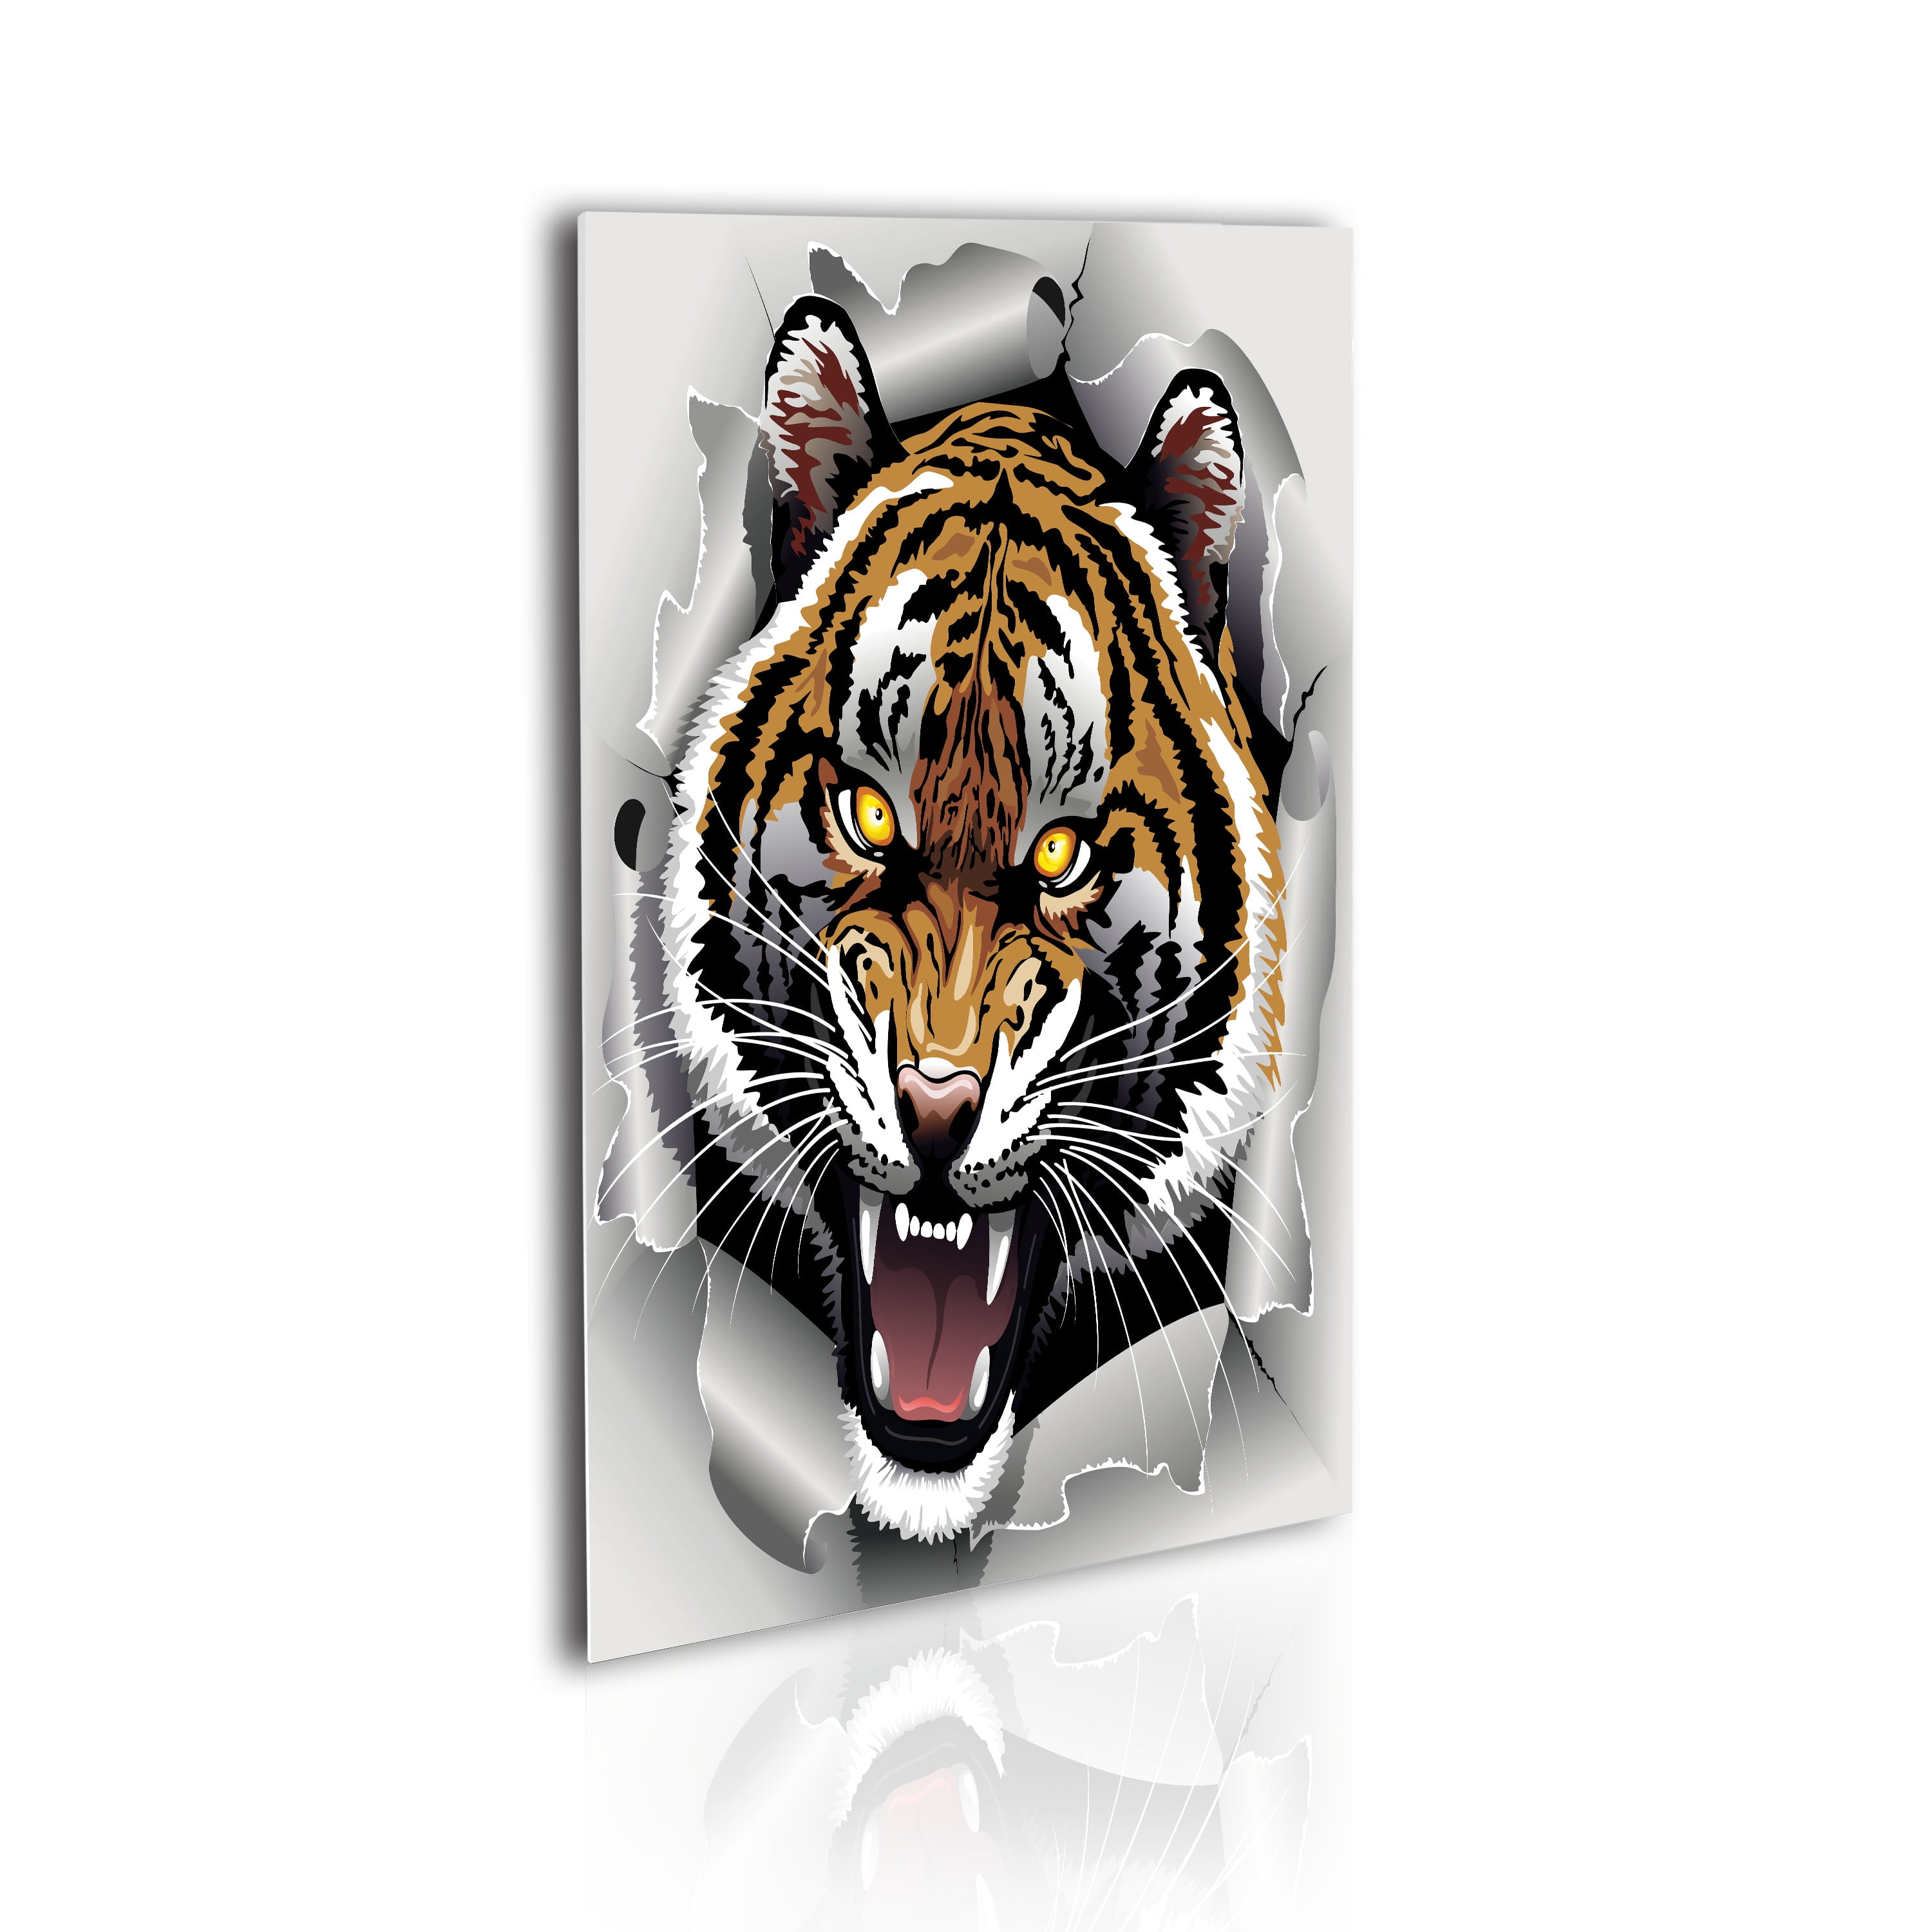 Animal Acrylic Glass Wall Art, Angry Roaring Tiger Cartoon Portrait Wild  Savage Exotic Cat Print, Decorative Accent for Living Room Bedroom & Dorms,  19